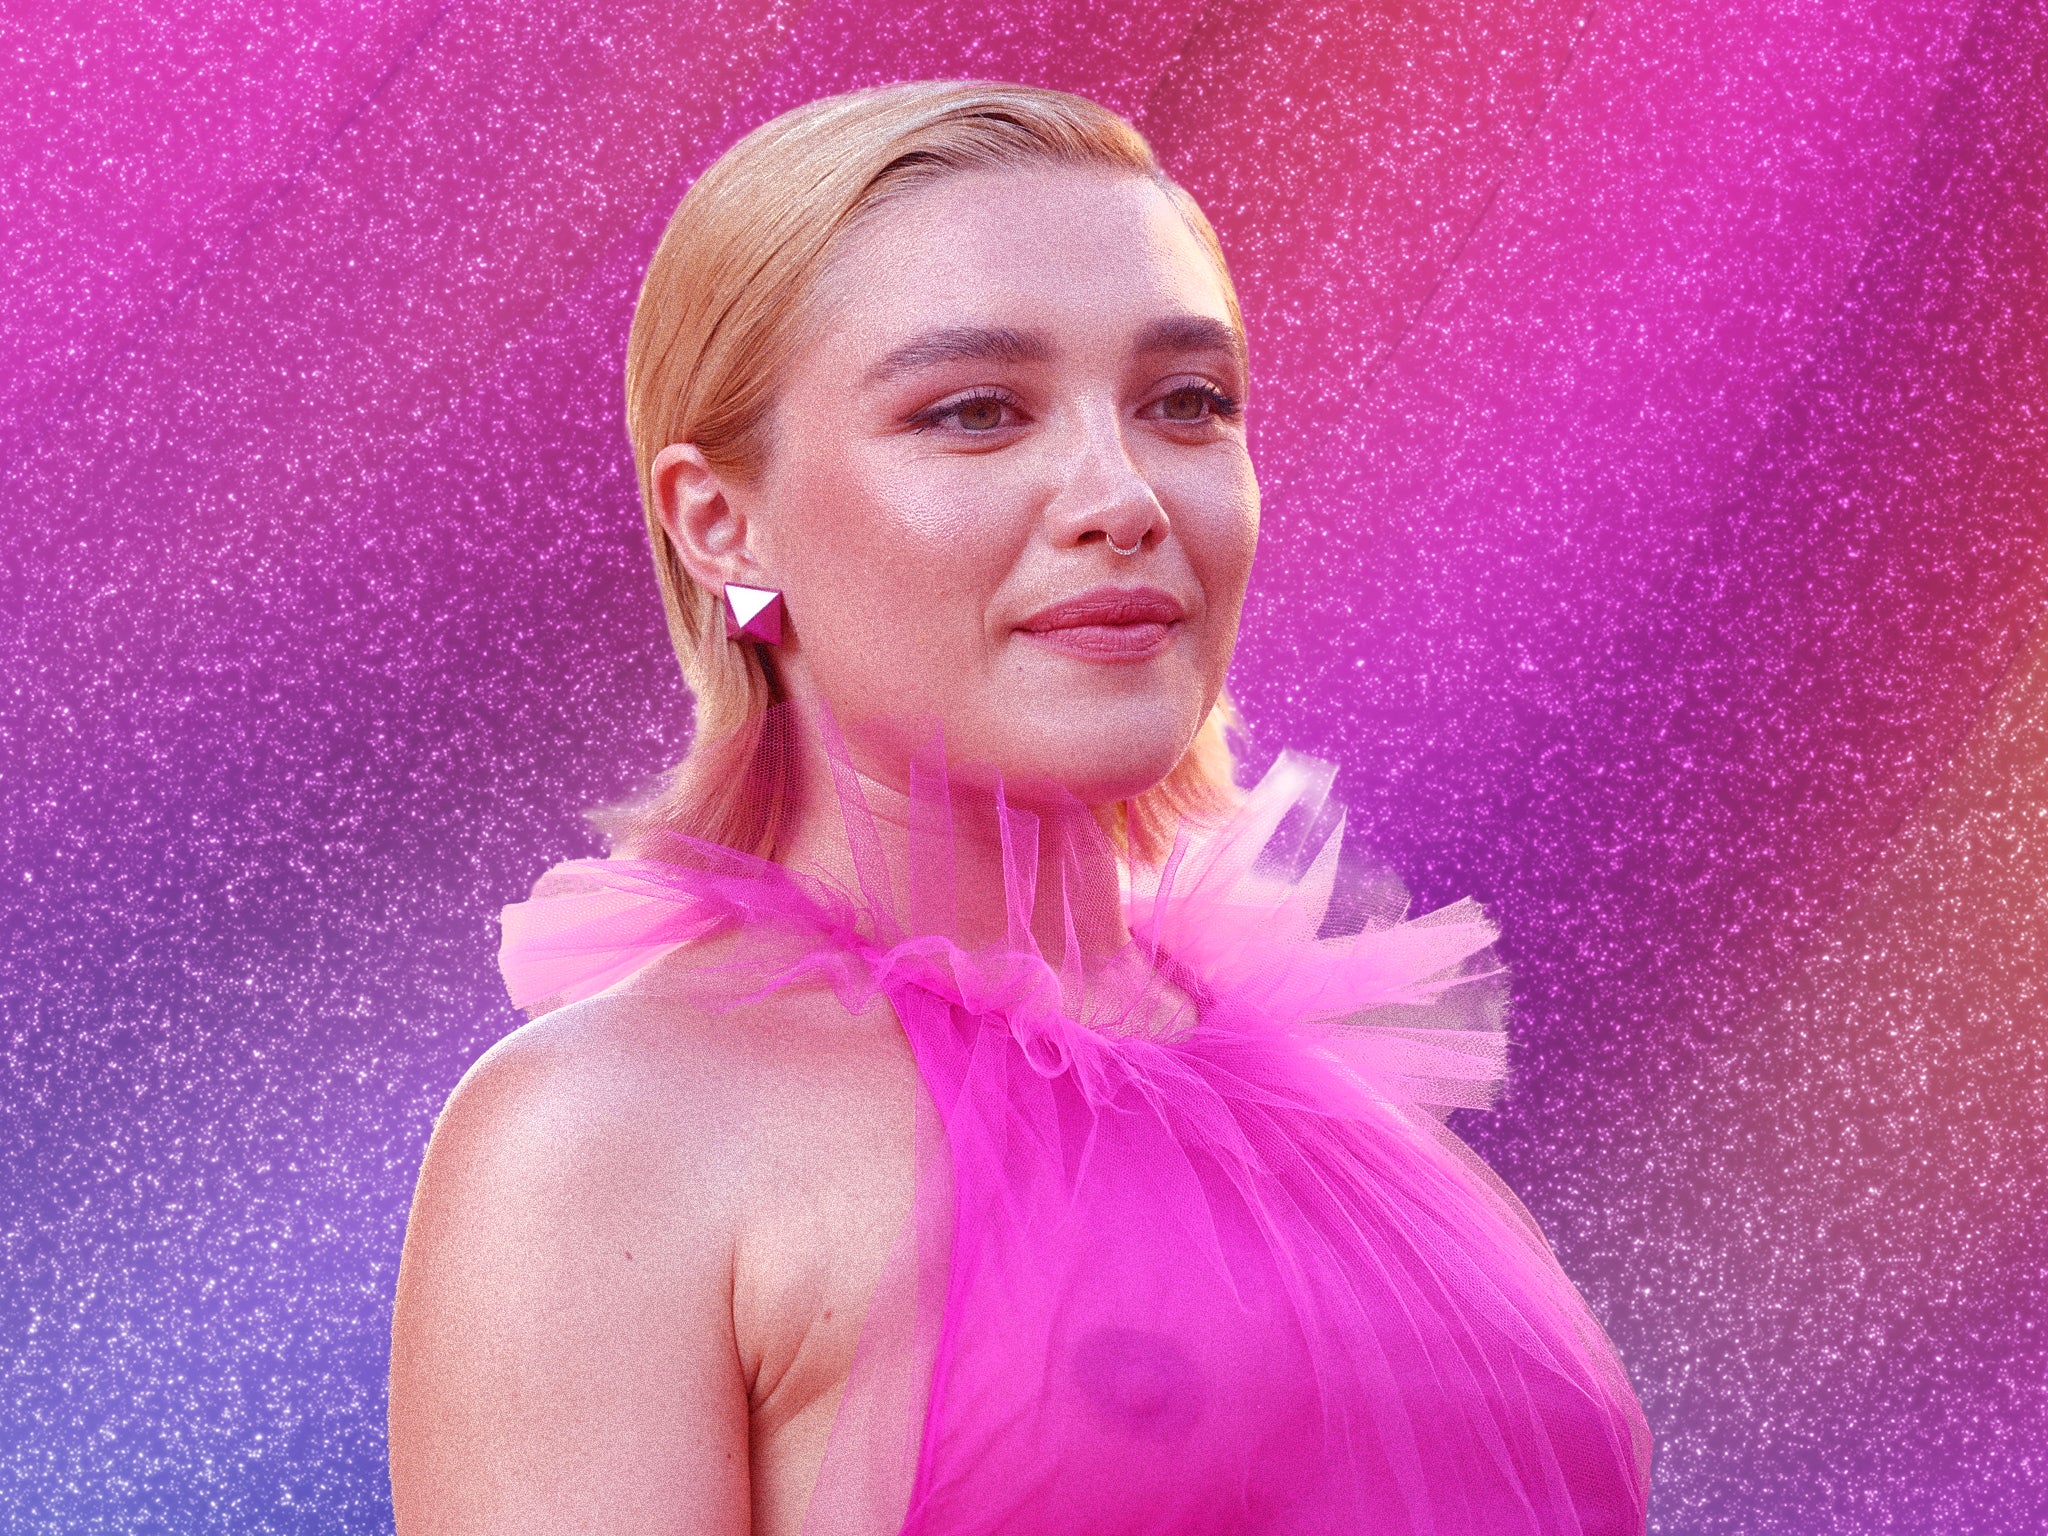 christie osborn recommends florence pugh boobs pic